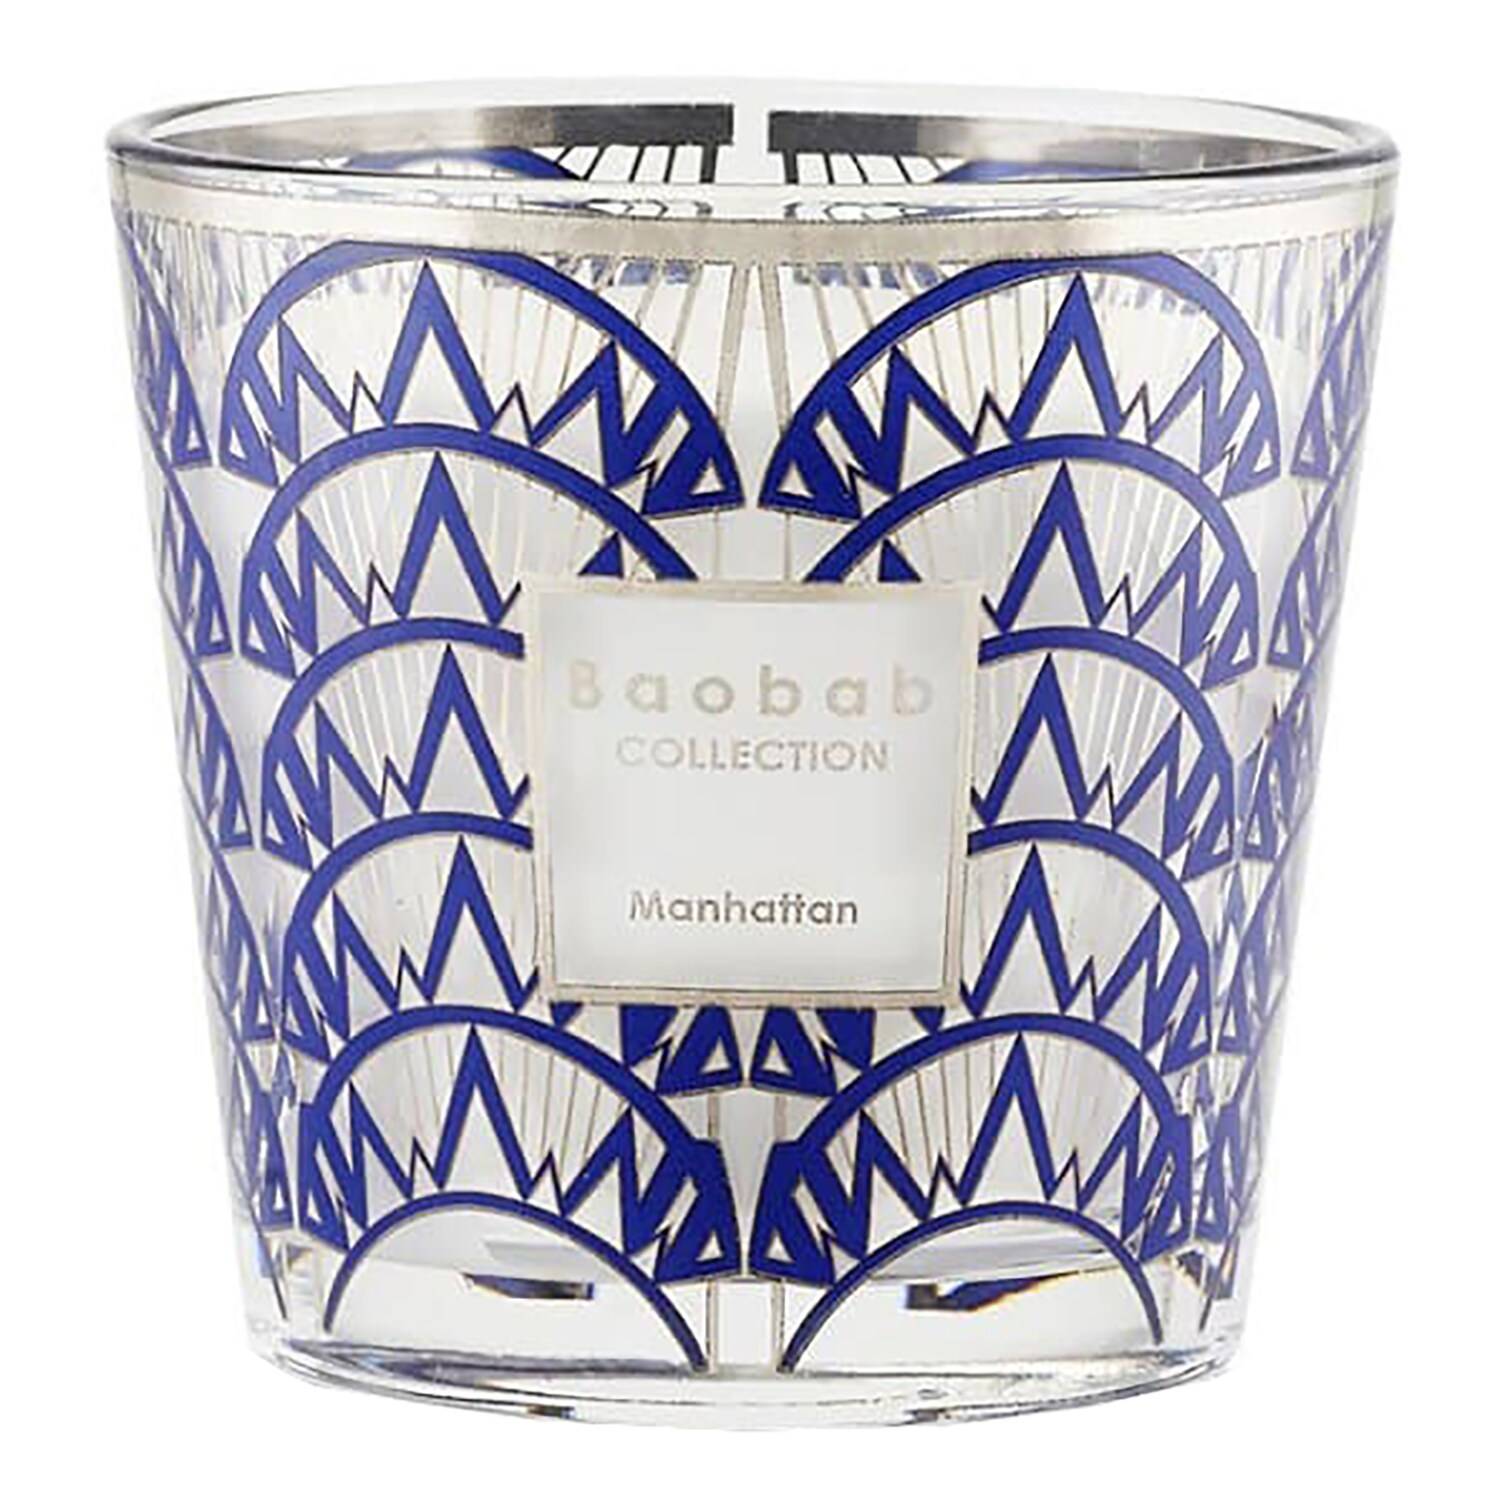 Baobab Collection My First Baobab Manhattan Scented Candle 190G